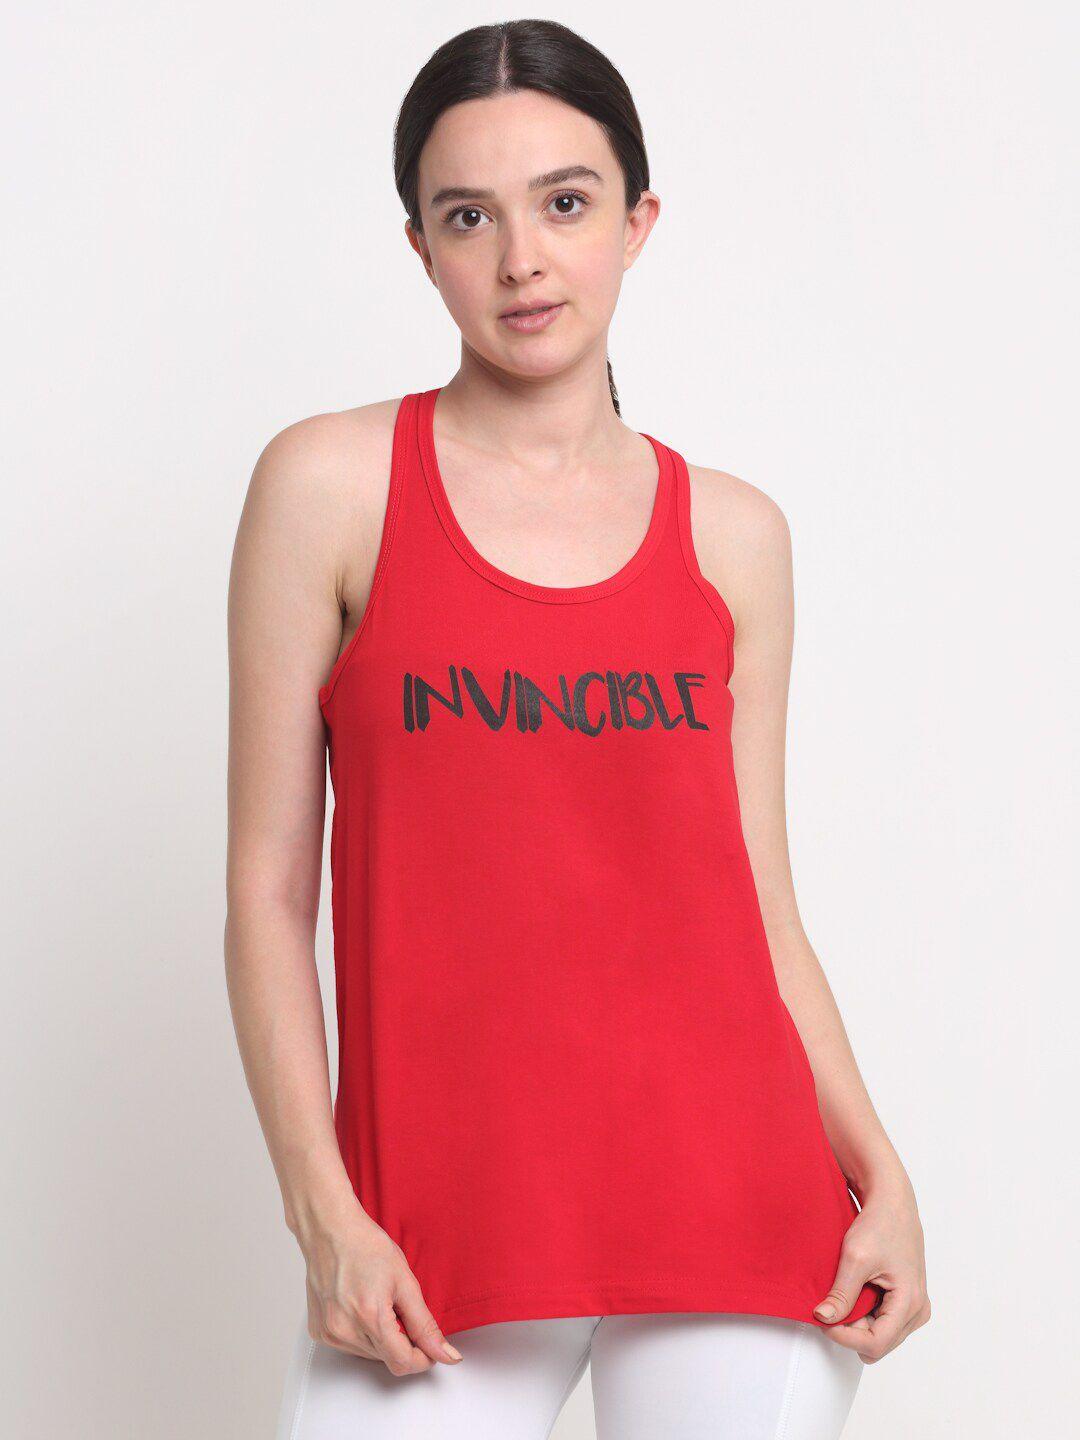 invincible-typography-printed-dri-fit-cotton-t-shirt